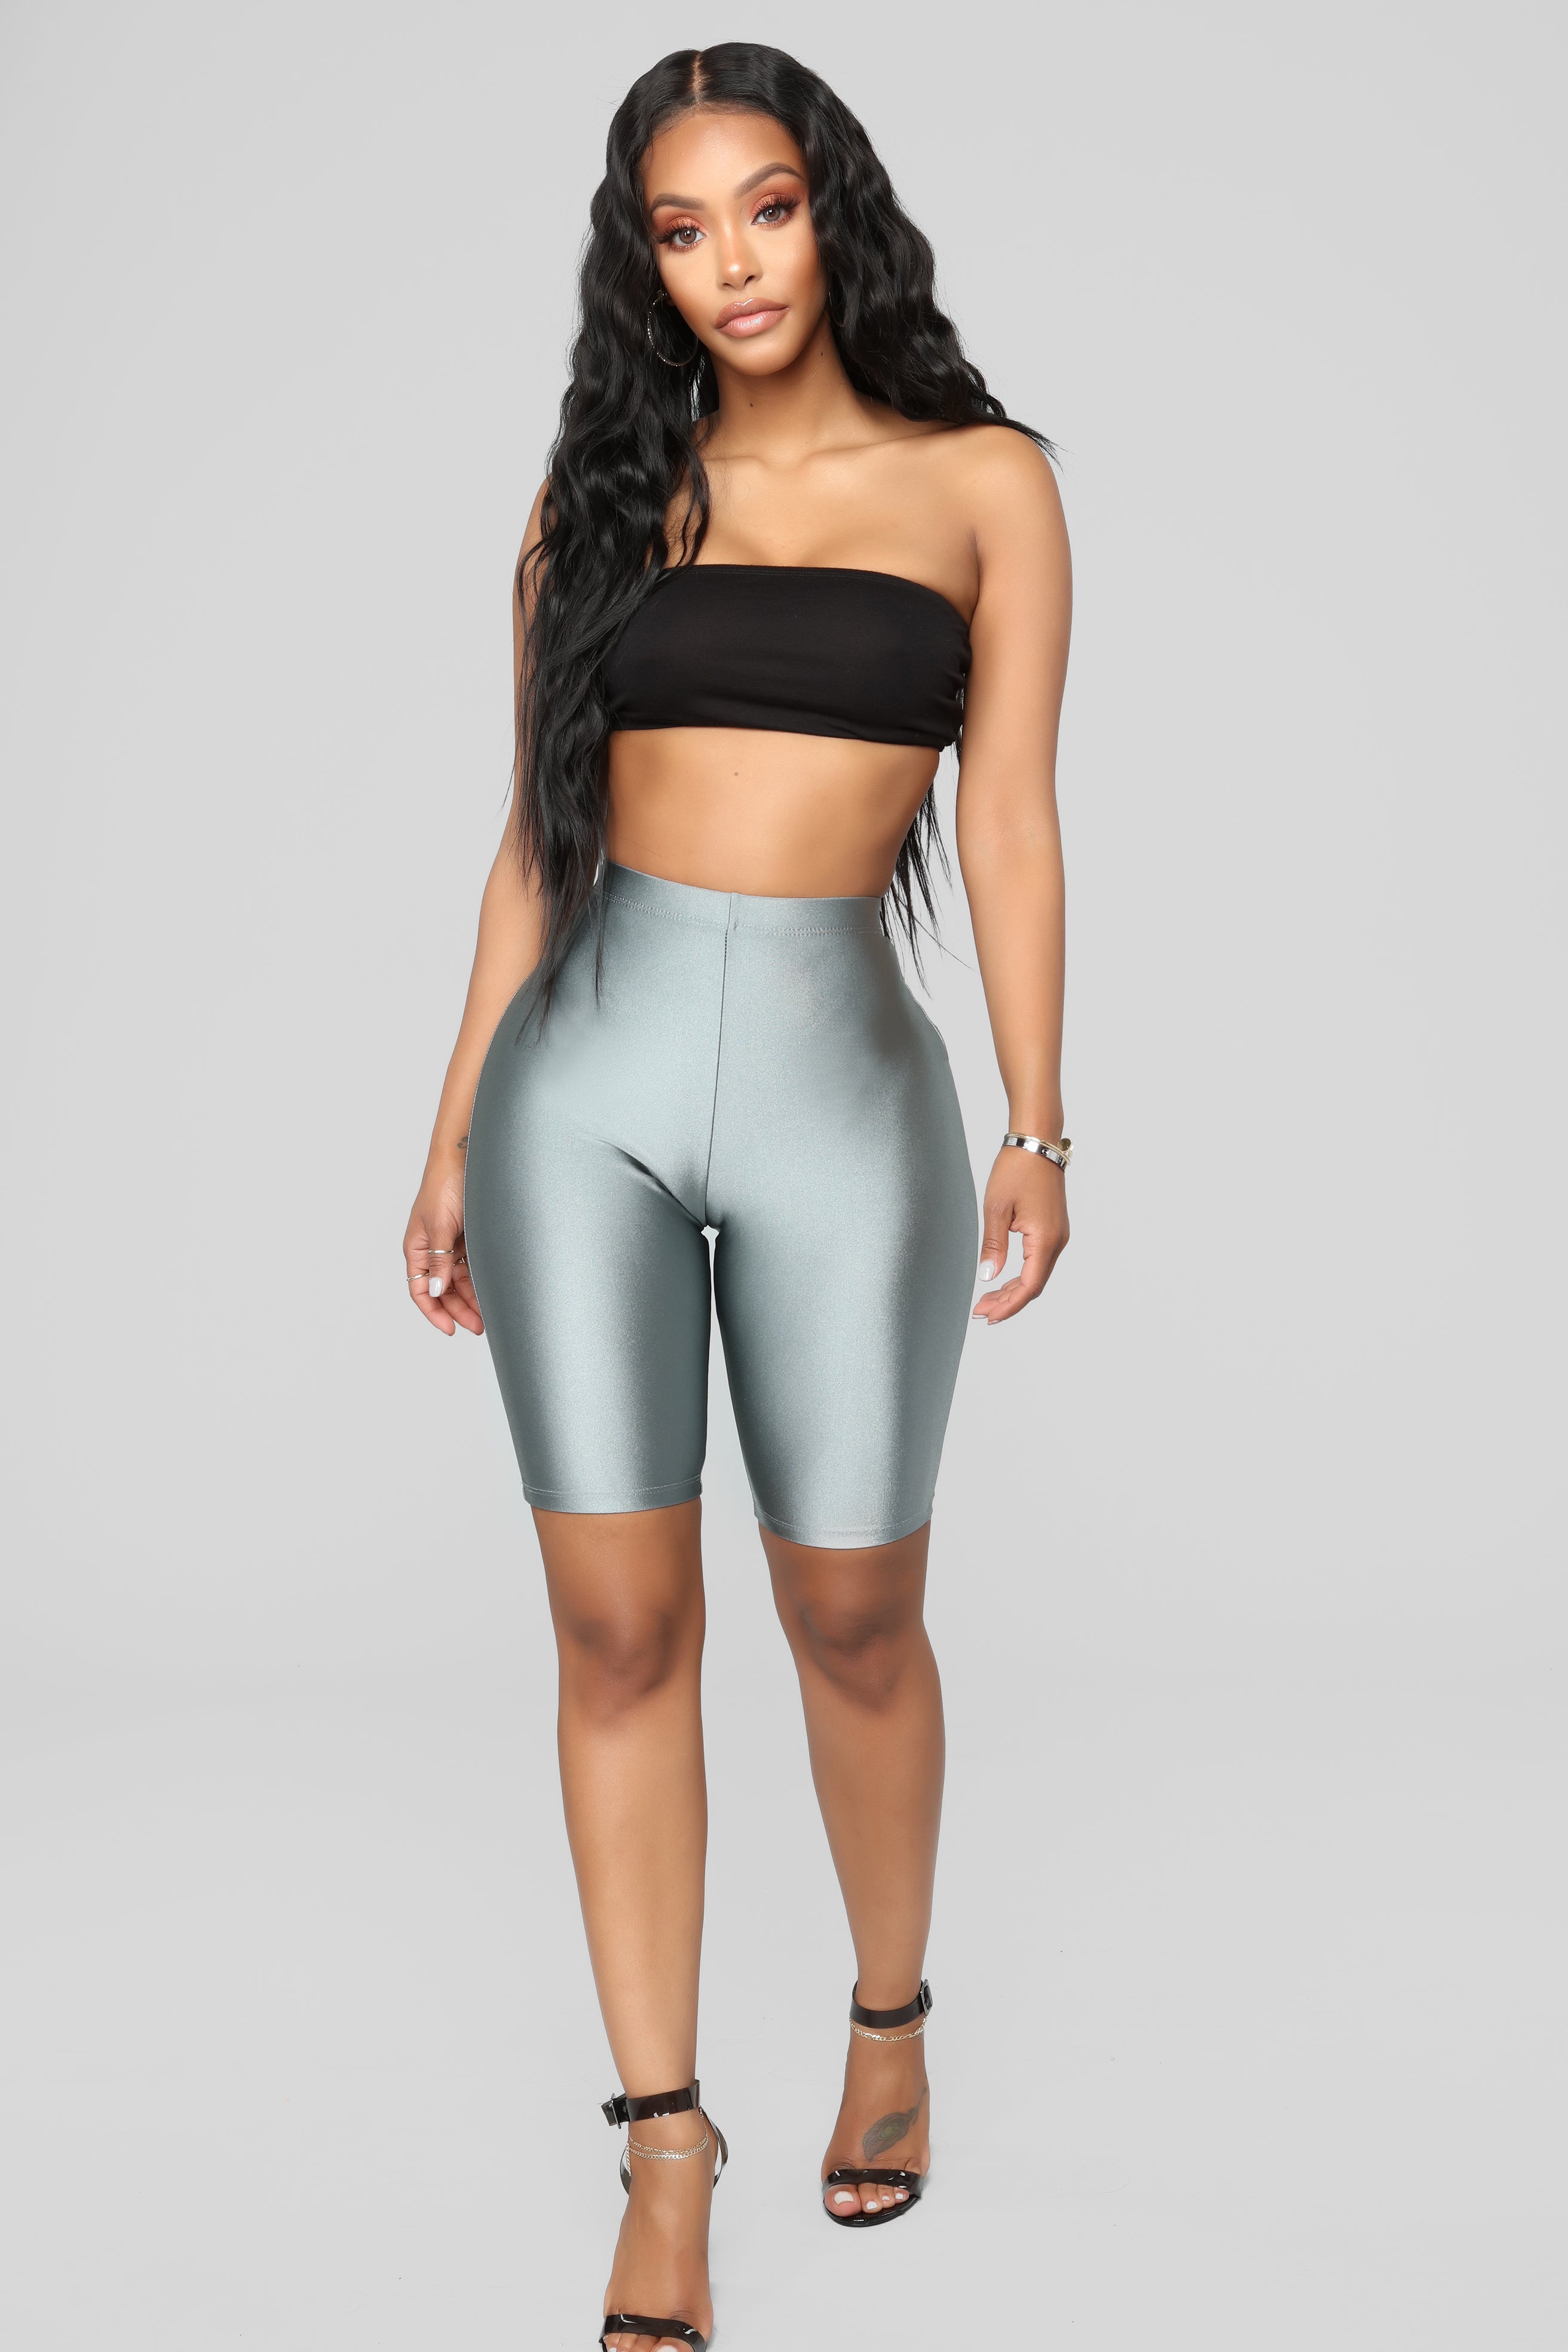 Curves For Days Biker Shorts Silver